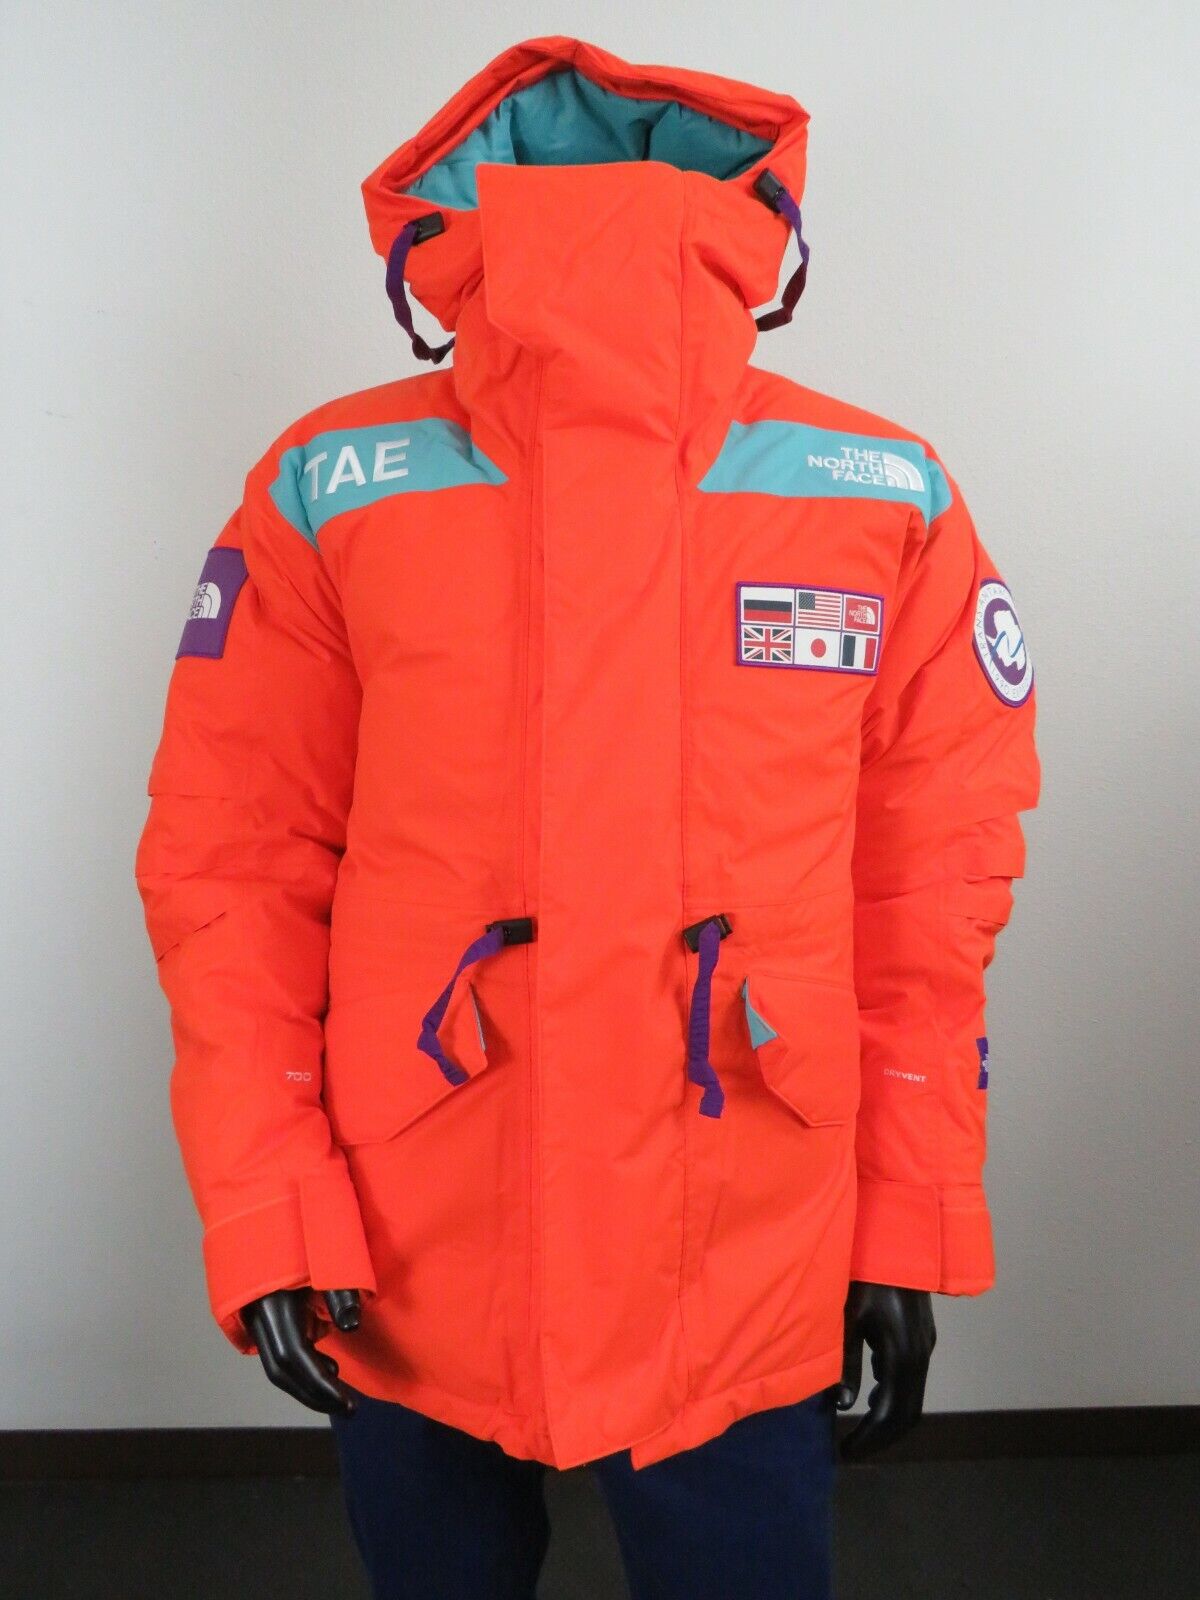 NWT The North Face TAE Trans-Antarctica Expedition 700-Down Hooded 